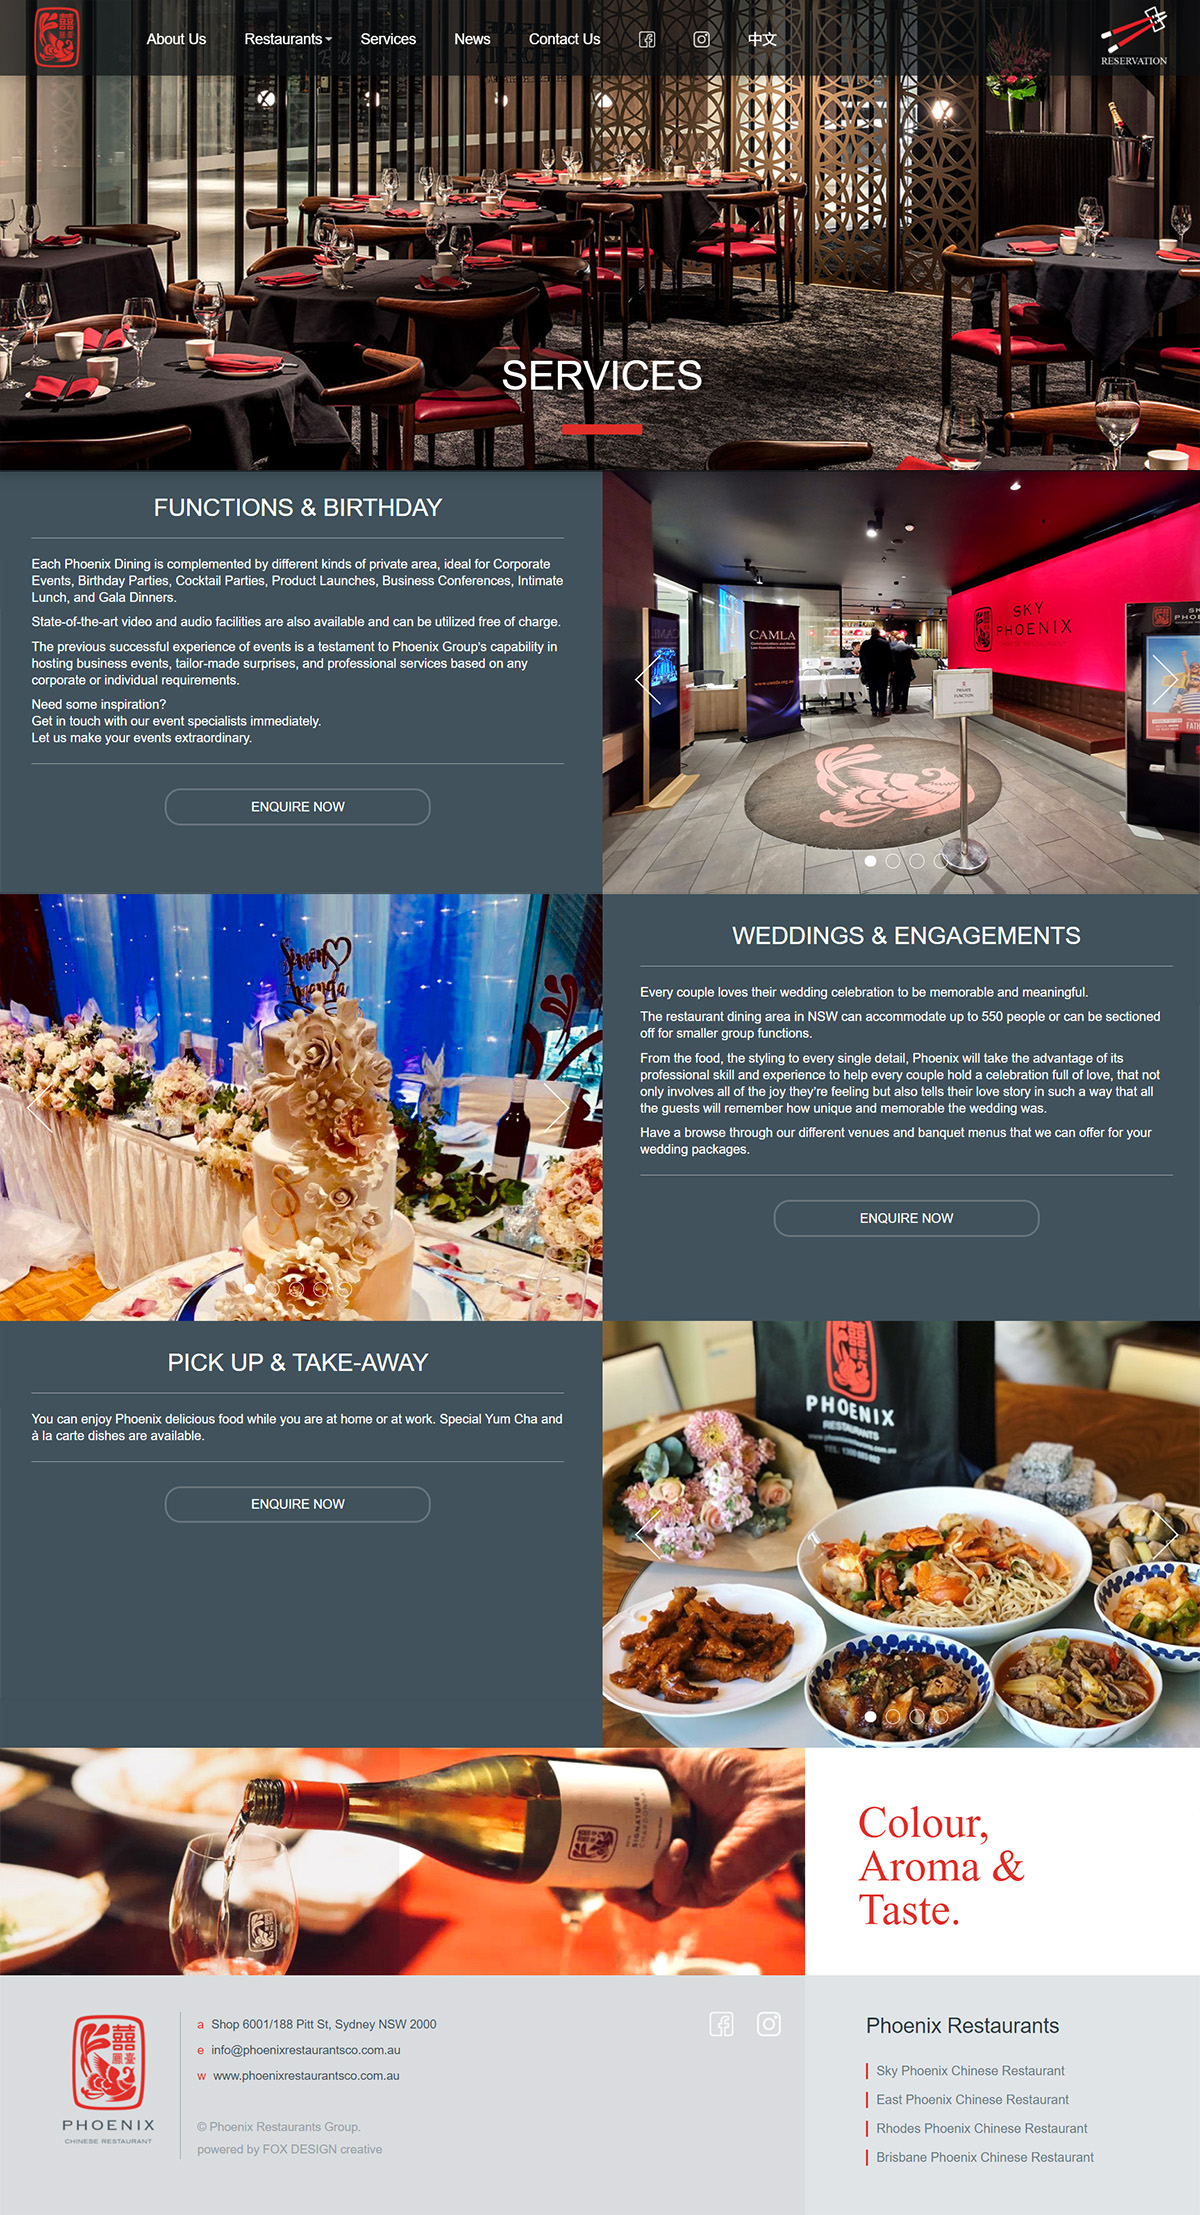  Phoenix-Chinese Restaurants Group Website integration and redesign by FOX DESIGN